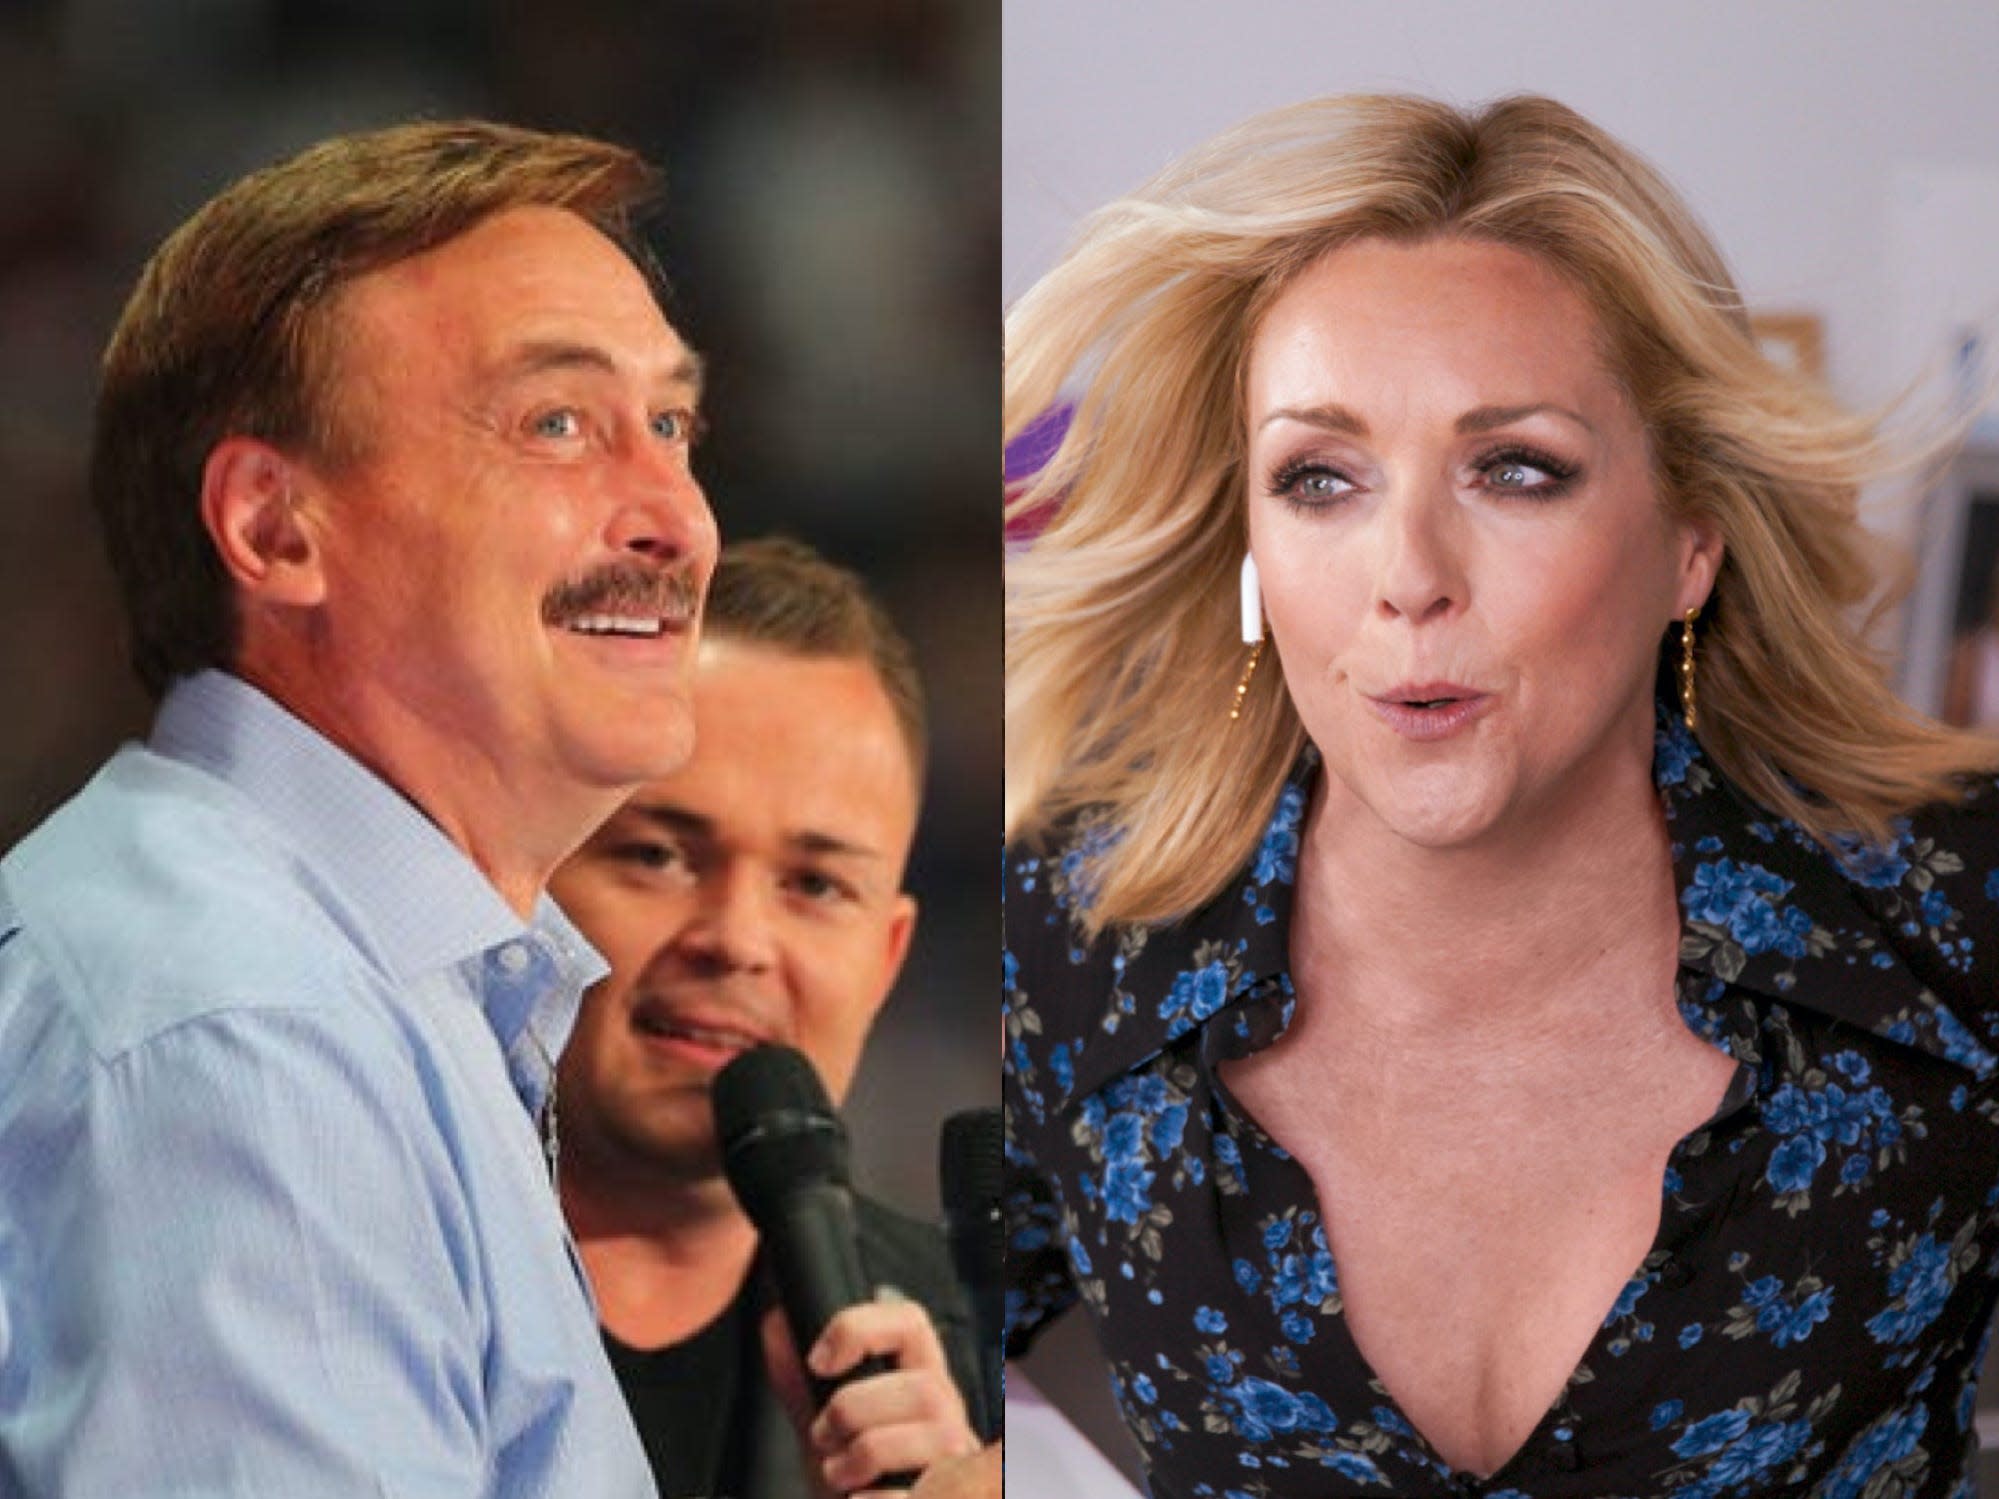 MyPillow CEO threatens to sue the Daily Mail after reporting that he had a ‘passionate romance’ with actress Jane Krakowski